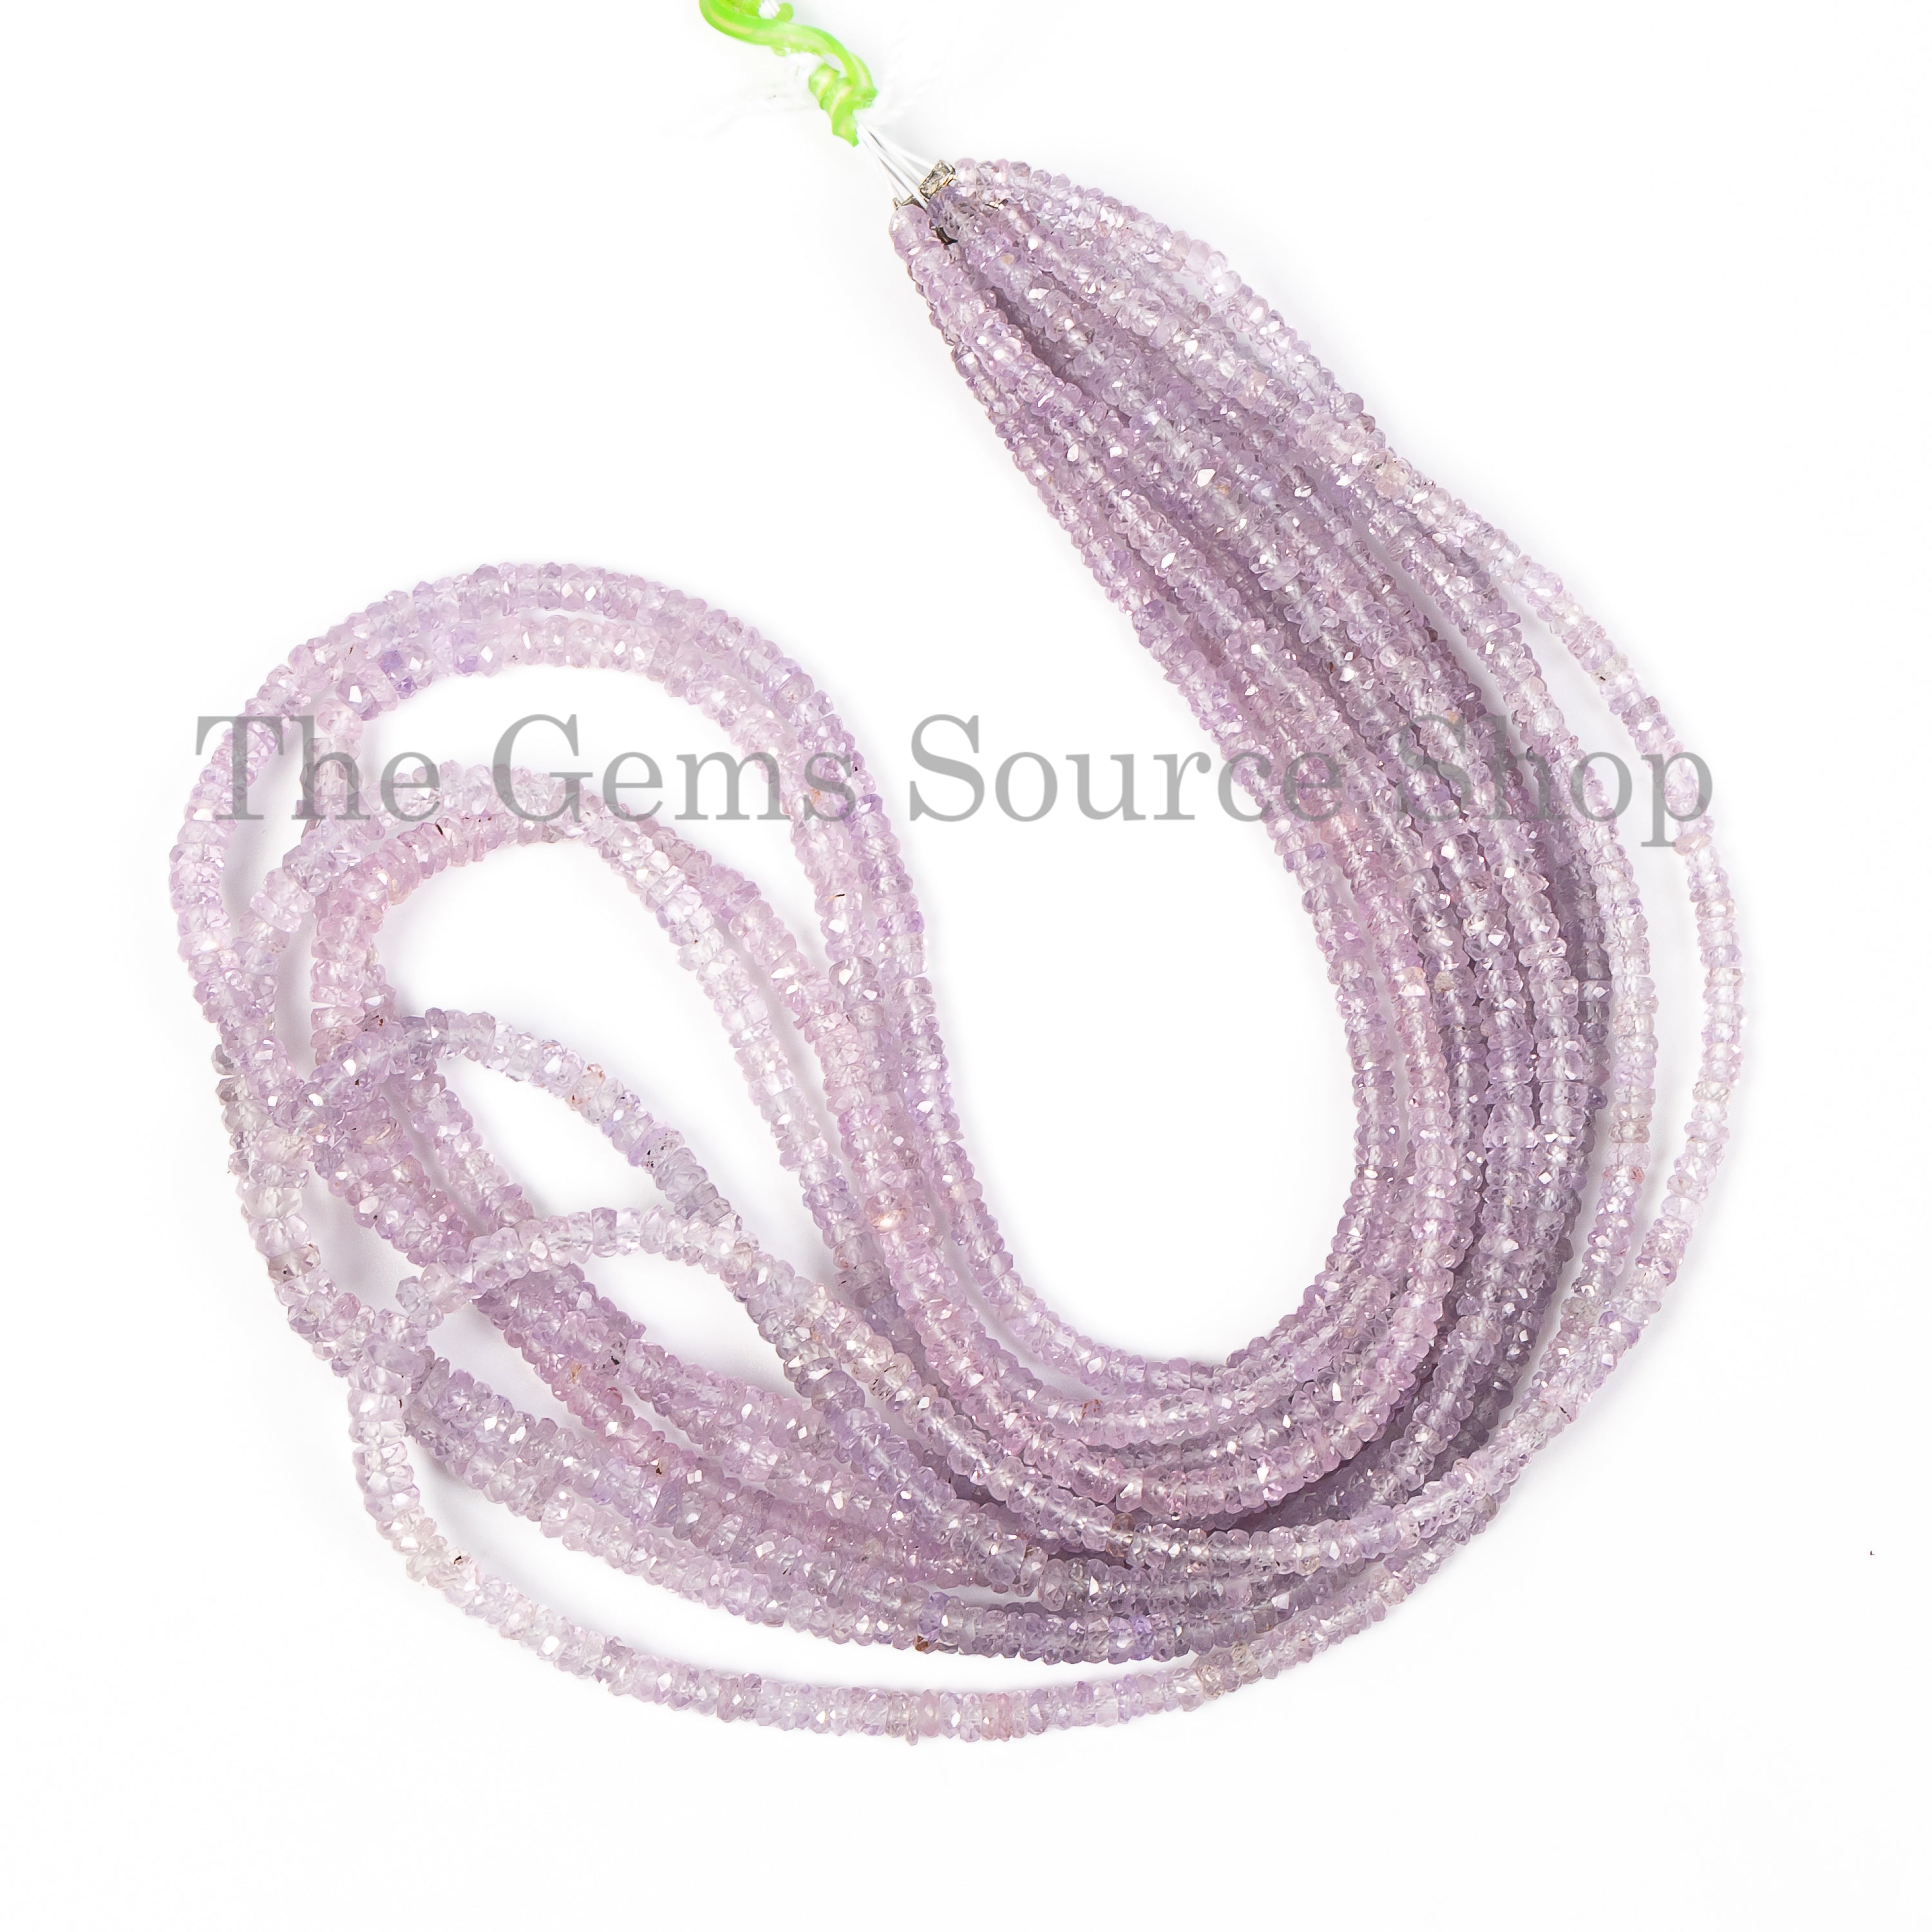 Lavender Sapphire Faceted Rondelle Beads, Natural Precious Gemstone Beads, 2.5-4mm Sapphire Beads, TGS-5059